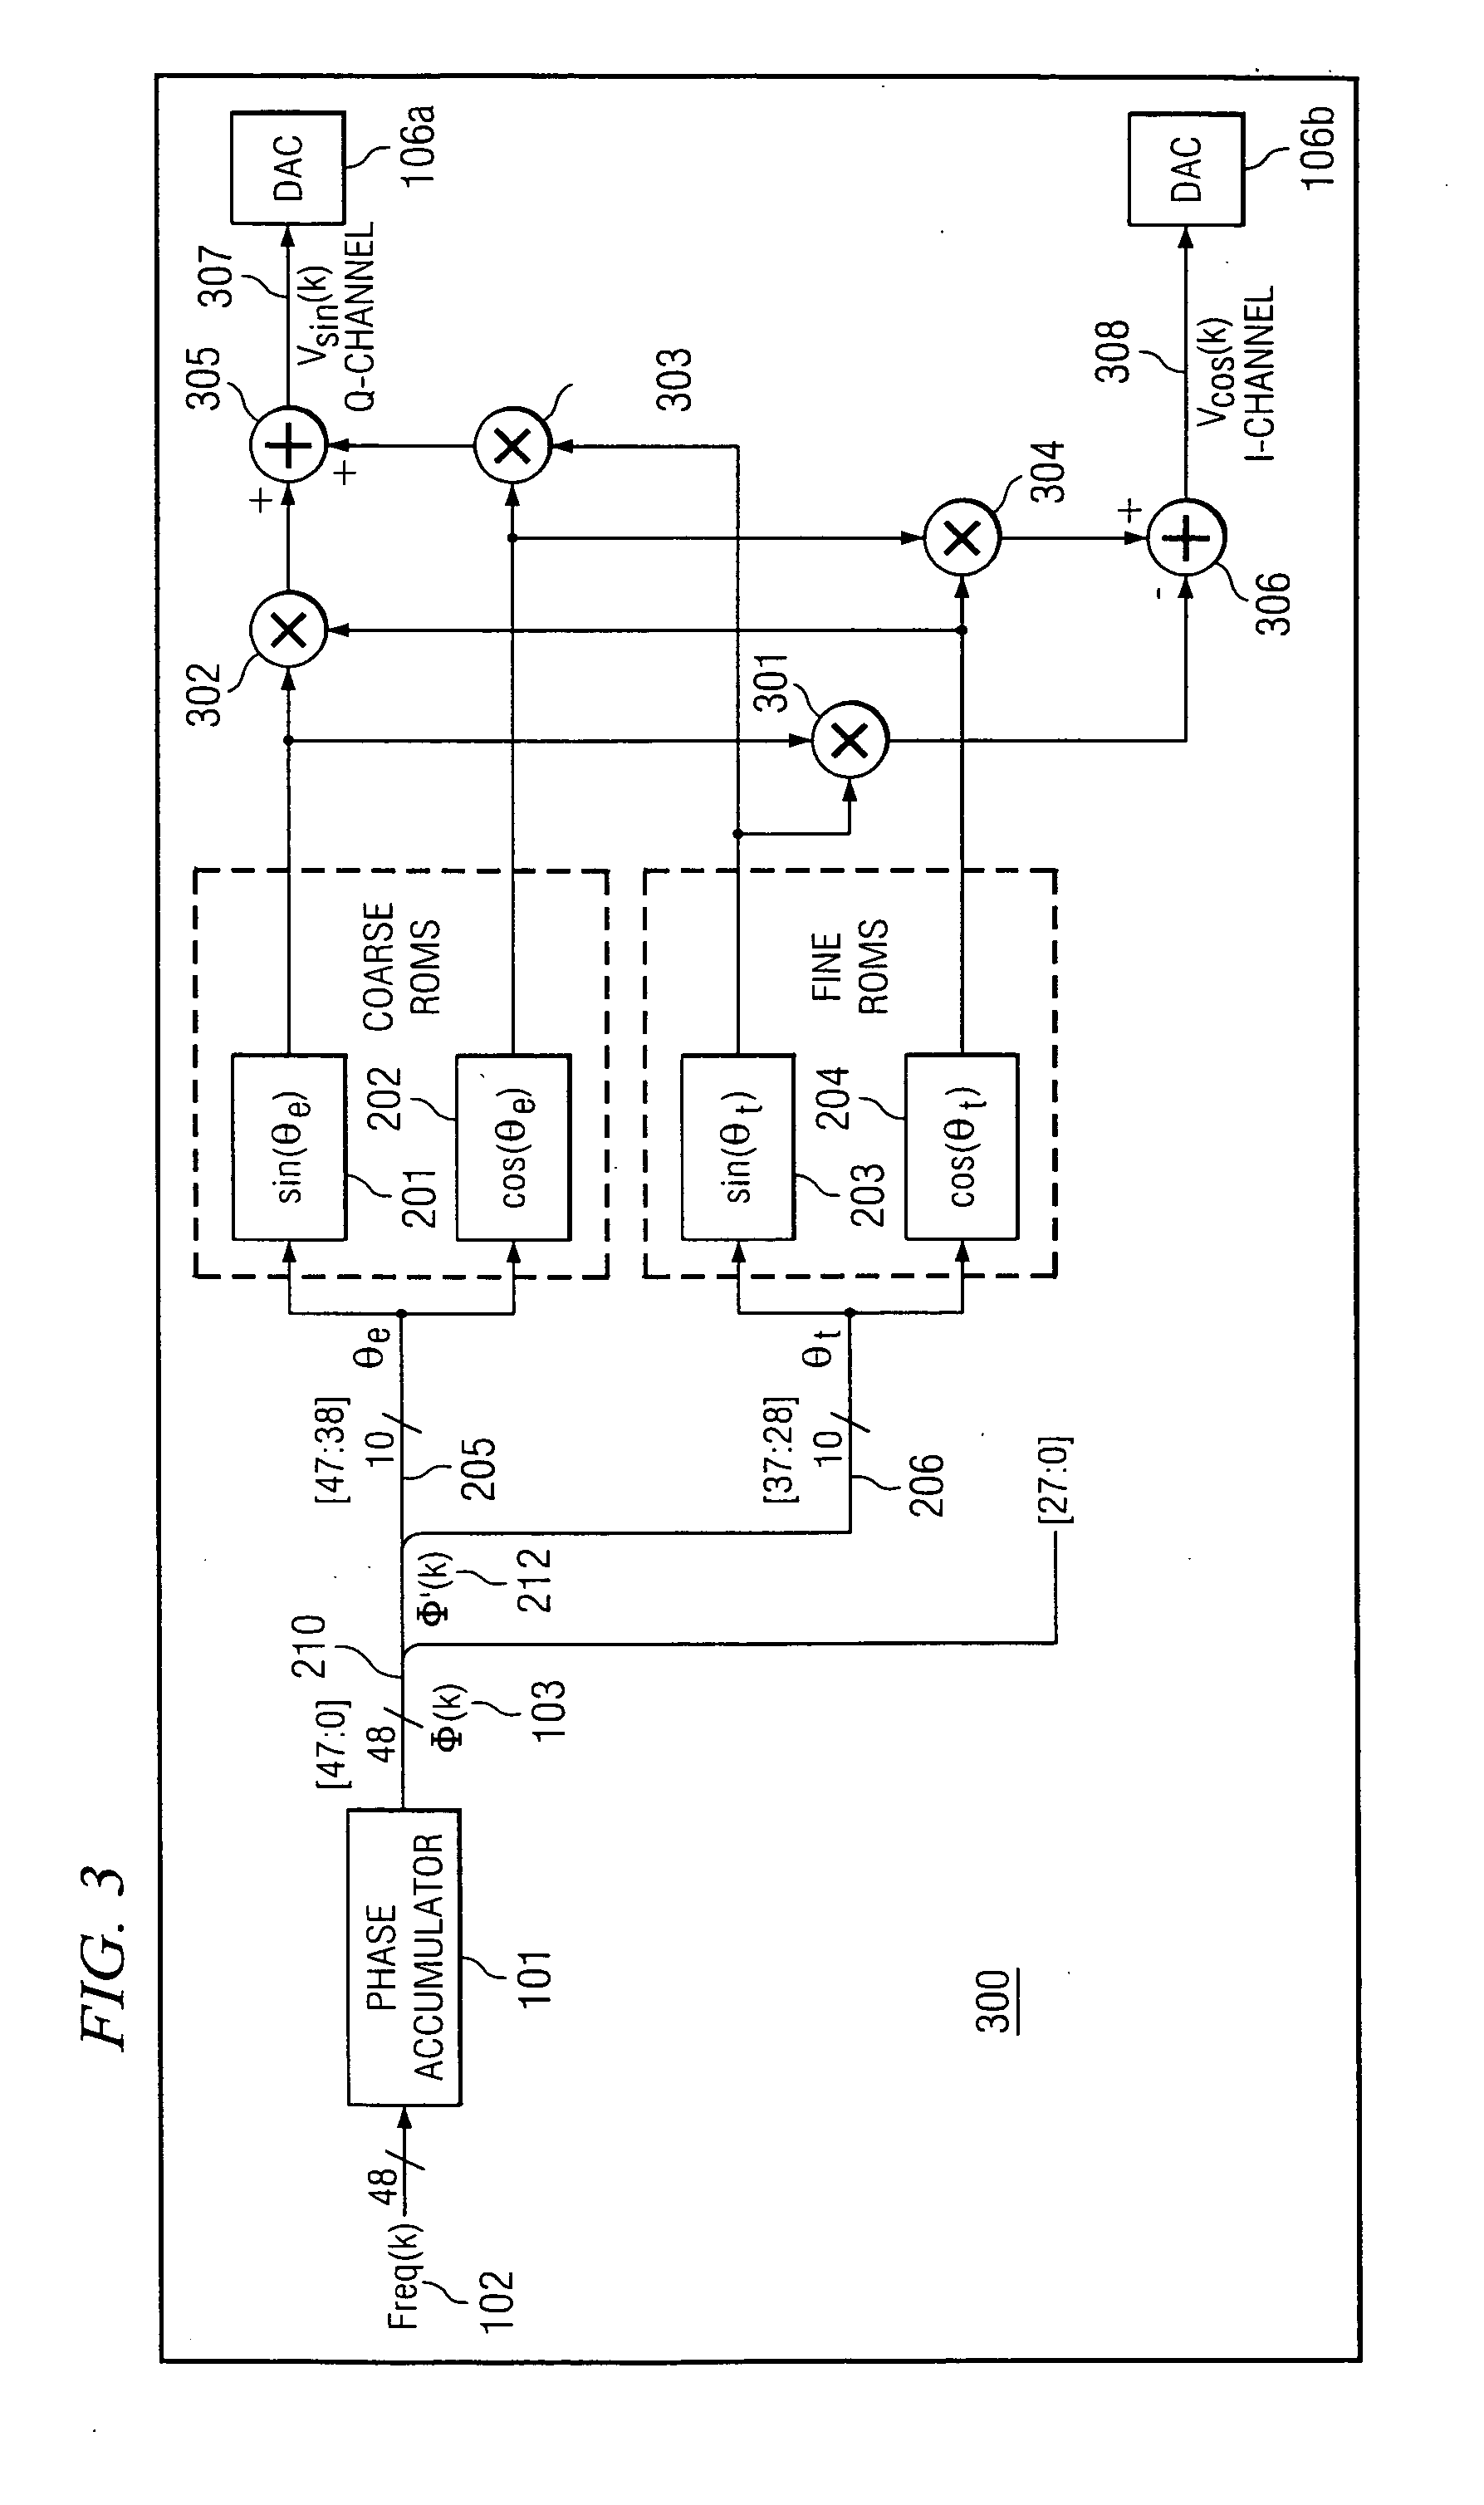 Numerically controlled oscillator and method of operation